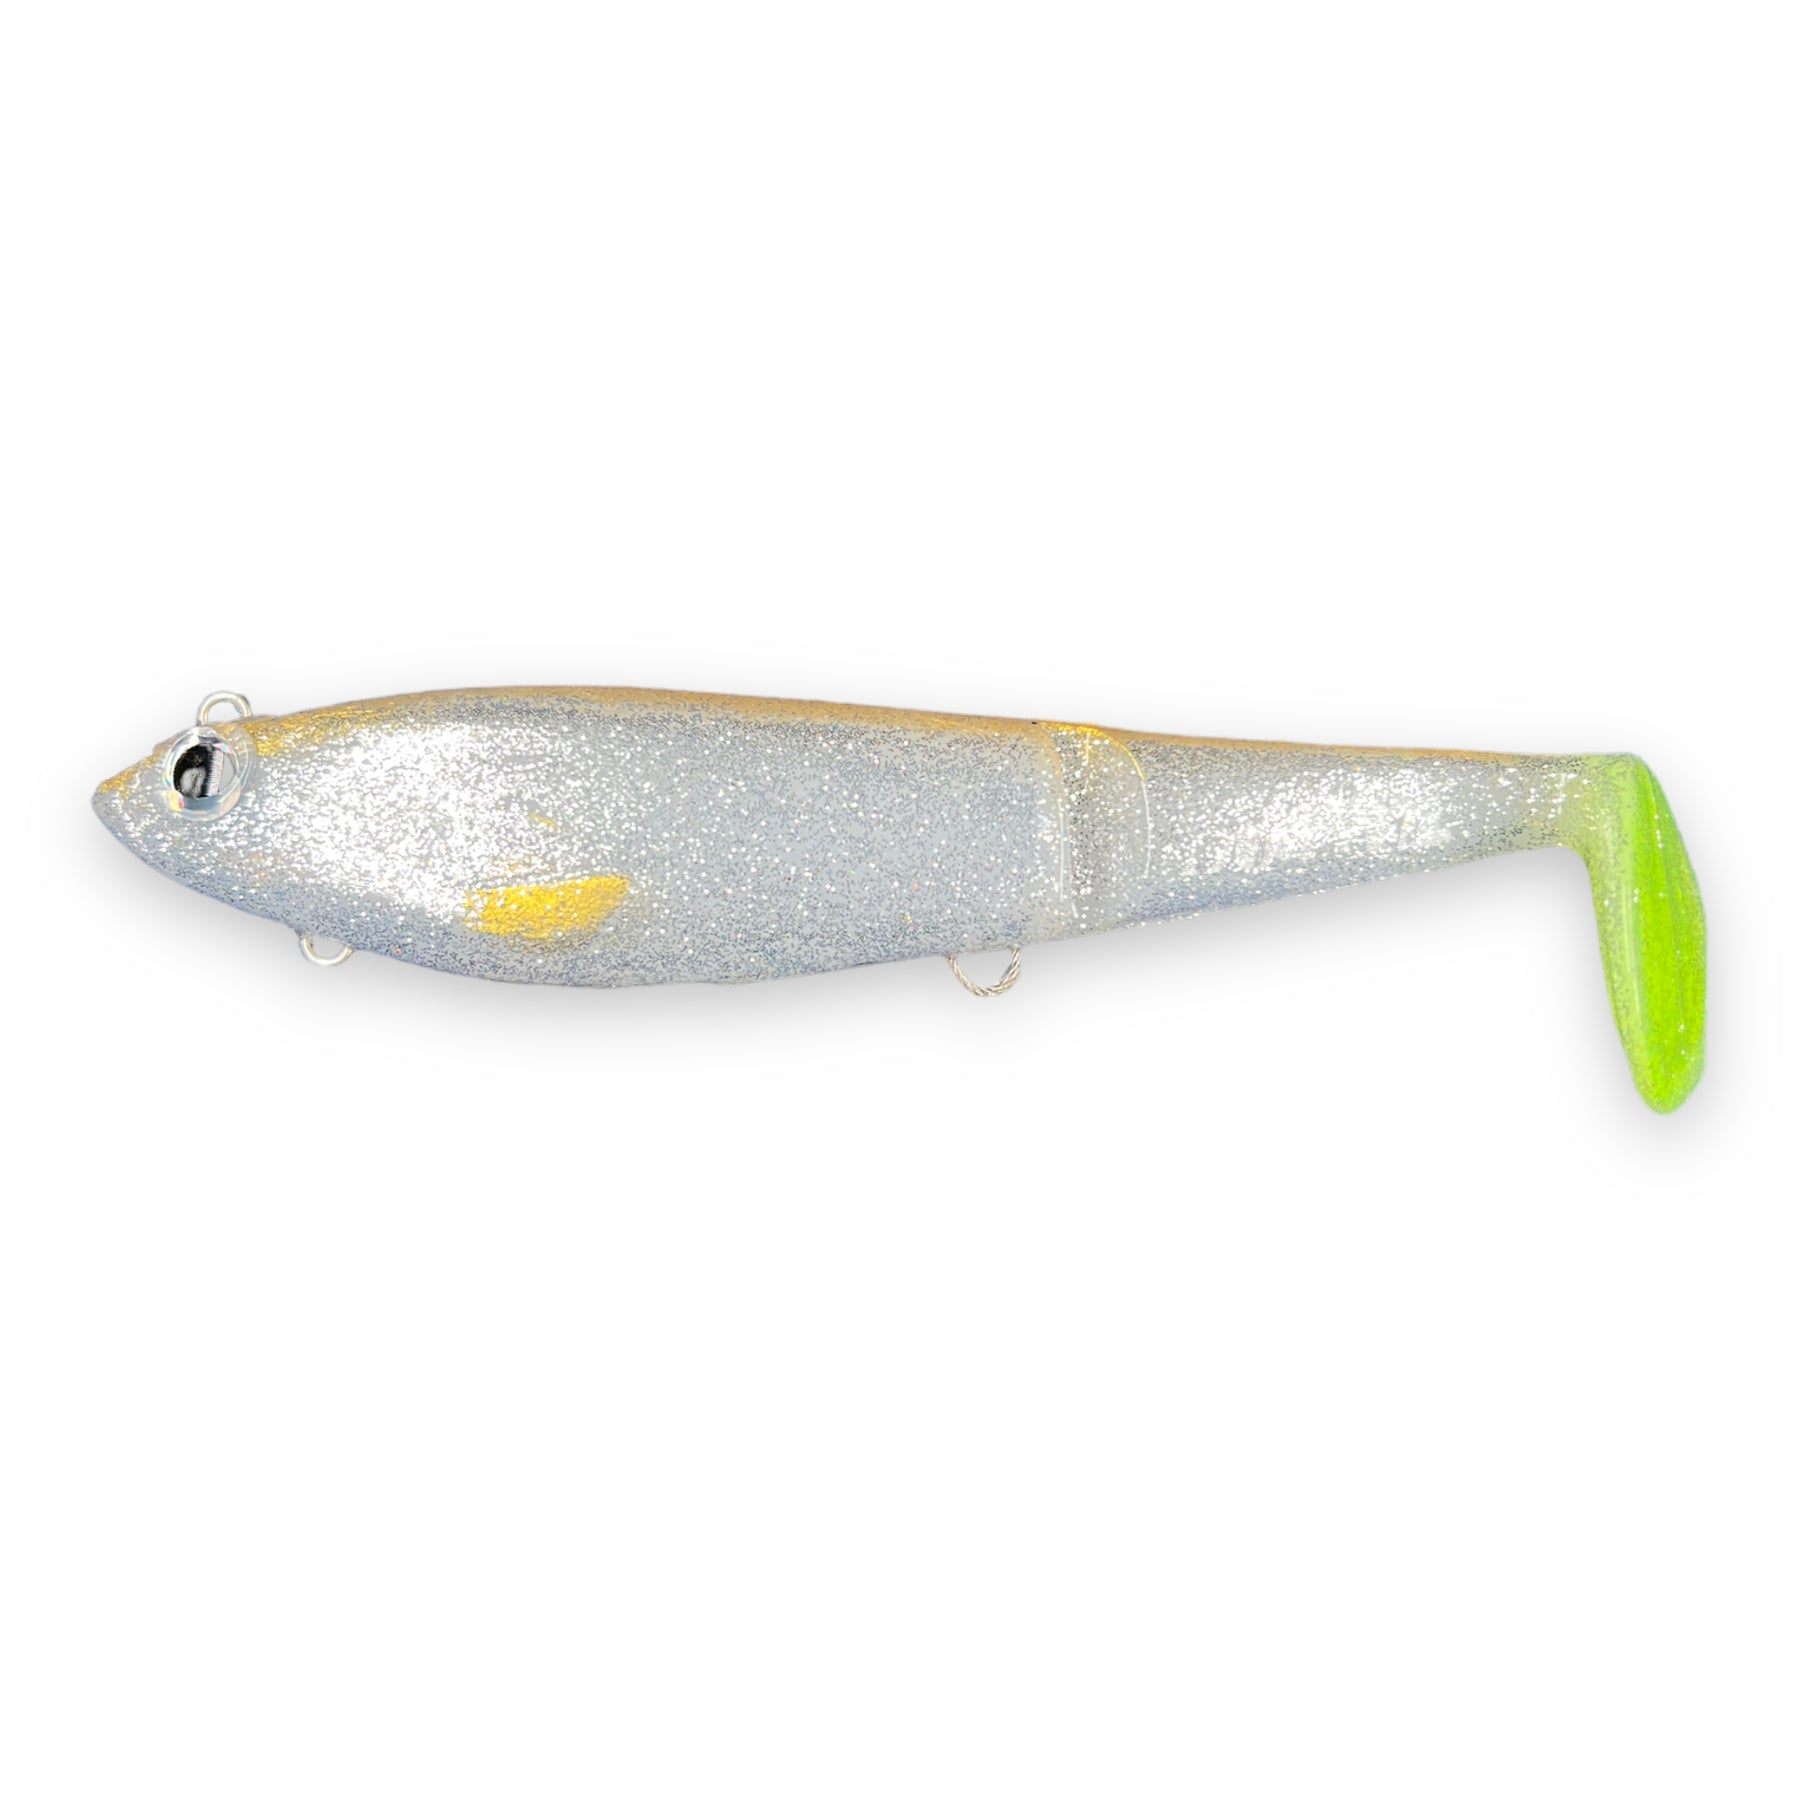 THREADY BUSTER SWIMBAIT – COMPLEAT Angler Cairns